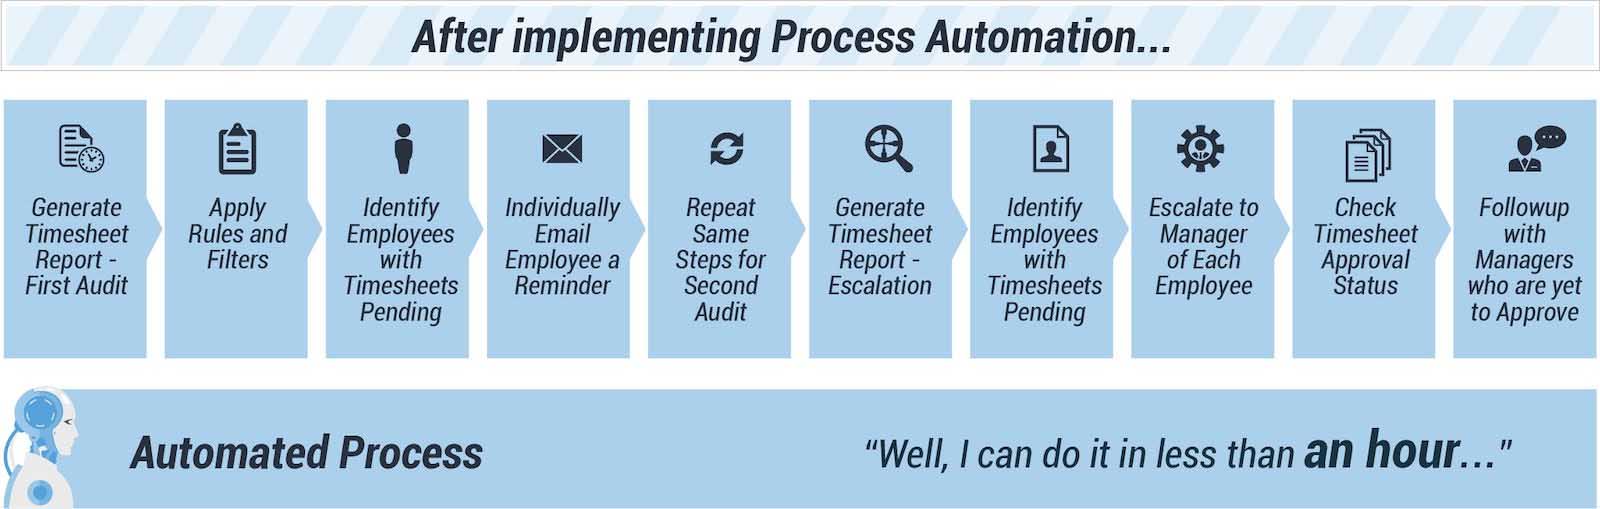 After Implementation Process Automation